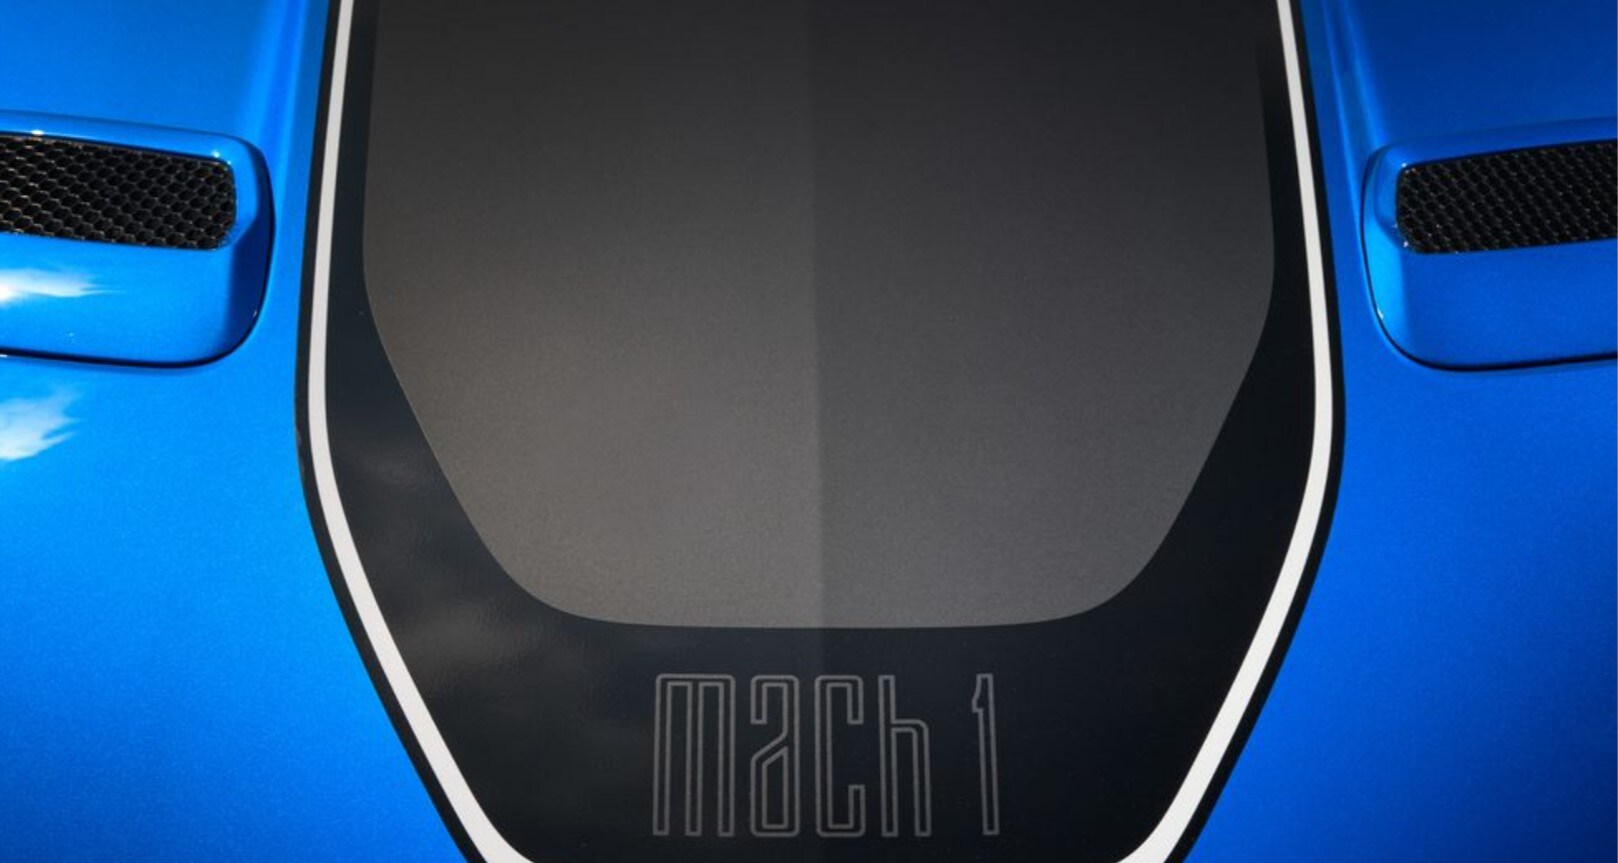 Zoomed in view of the Mach-1 brand